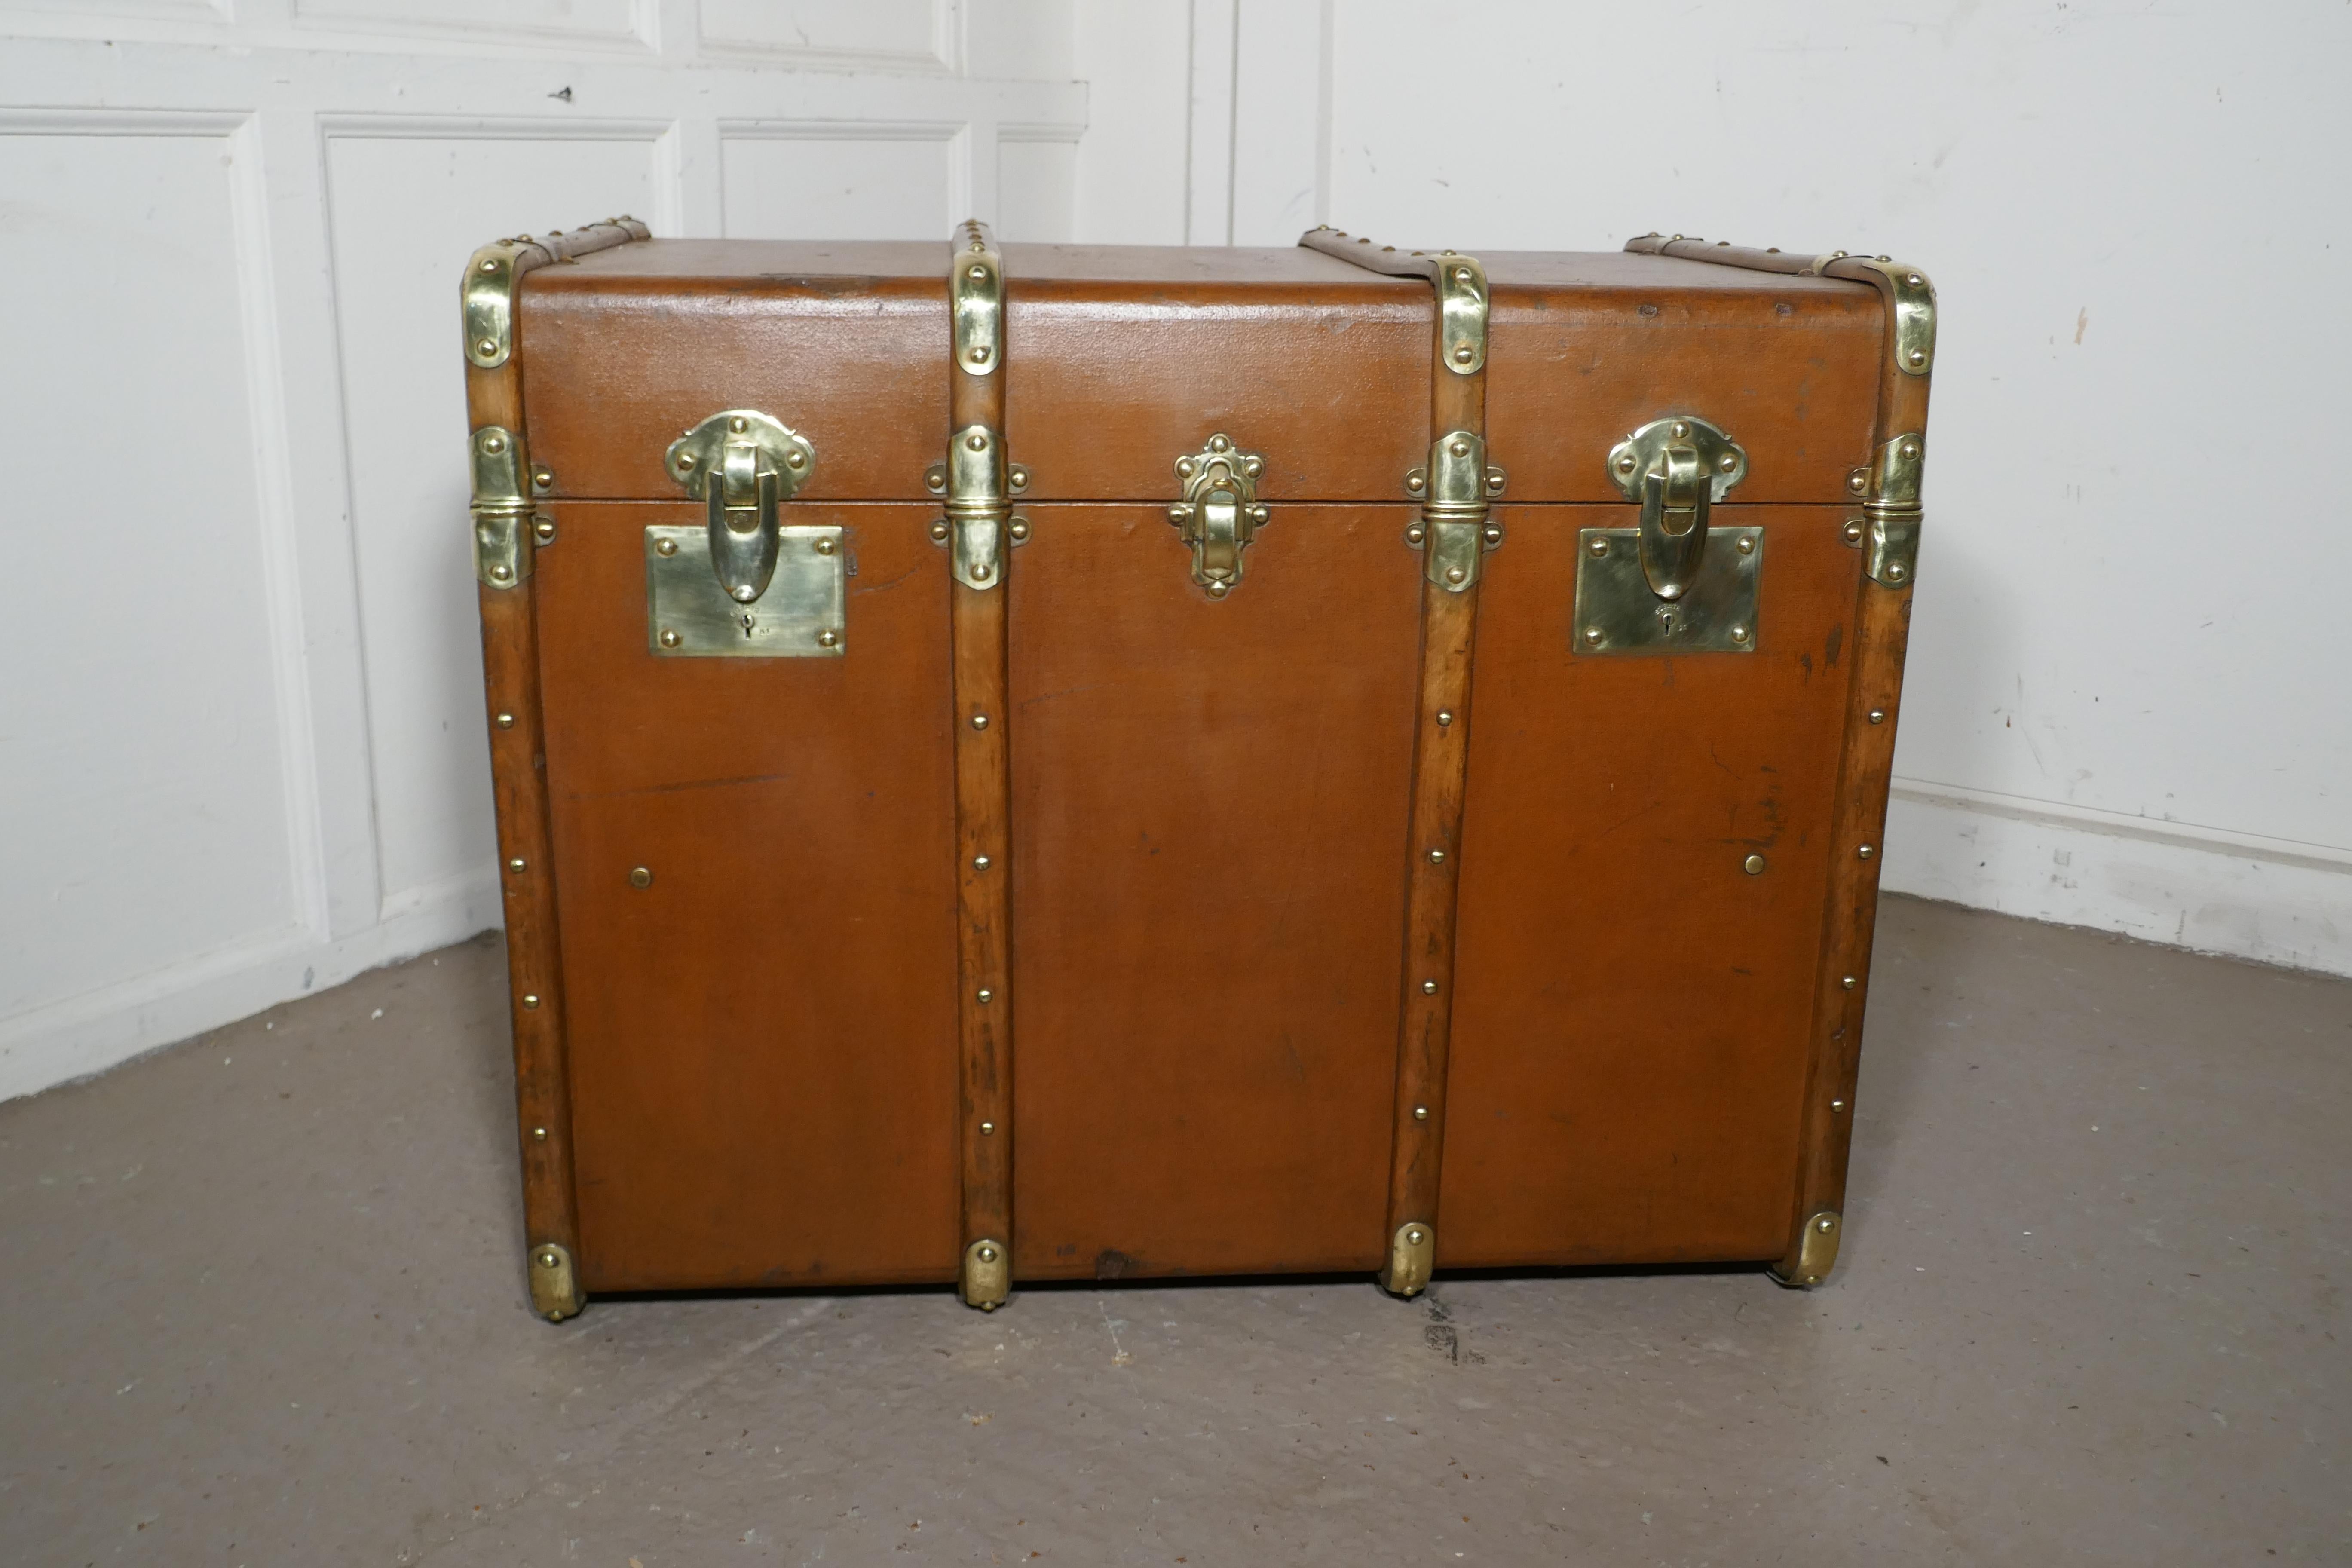 Victorian Large Tan Canvas, Wood and Brass Bound Steamer Trunk